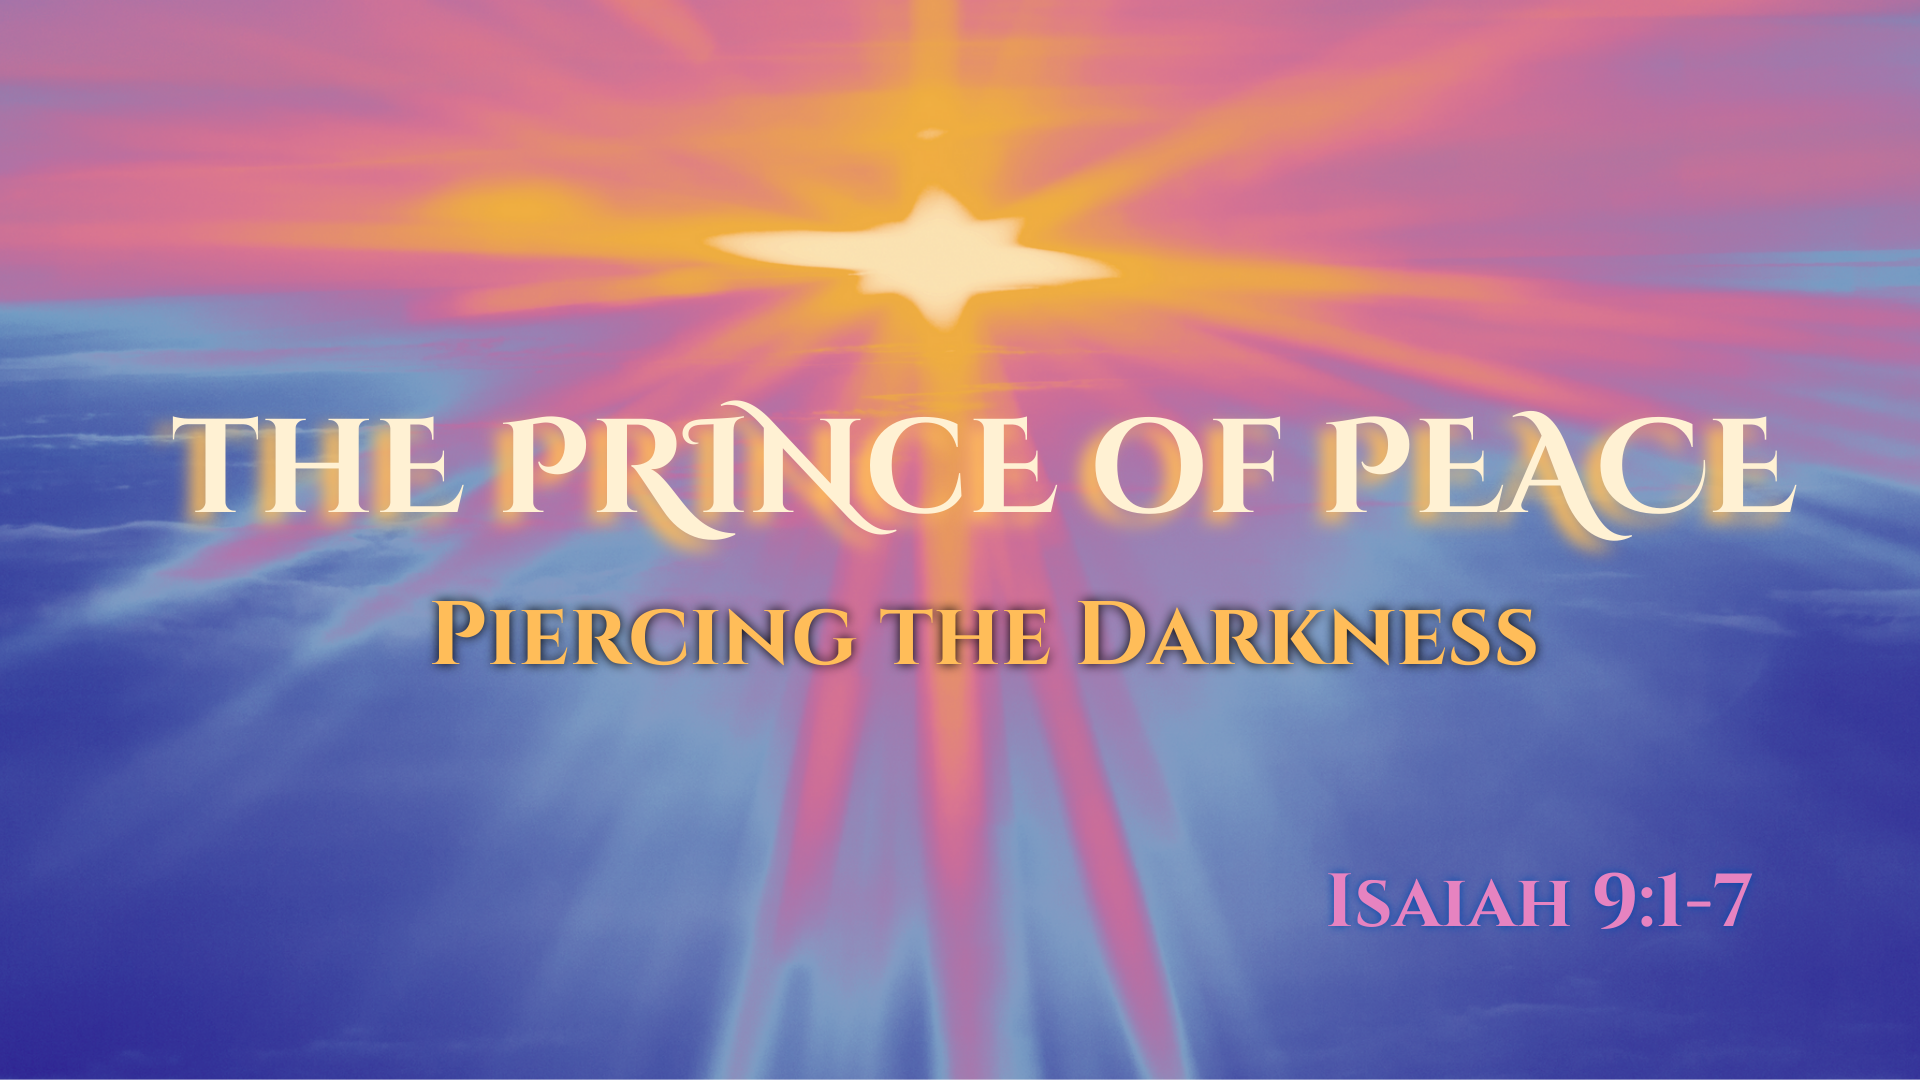 The Prince of Peace (Piercing The Darkness) Isaiah 91-7